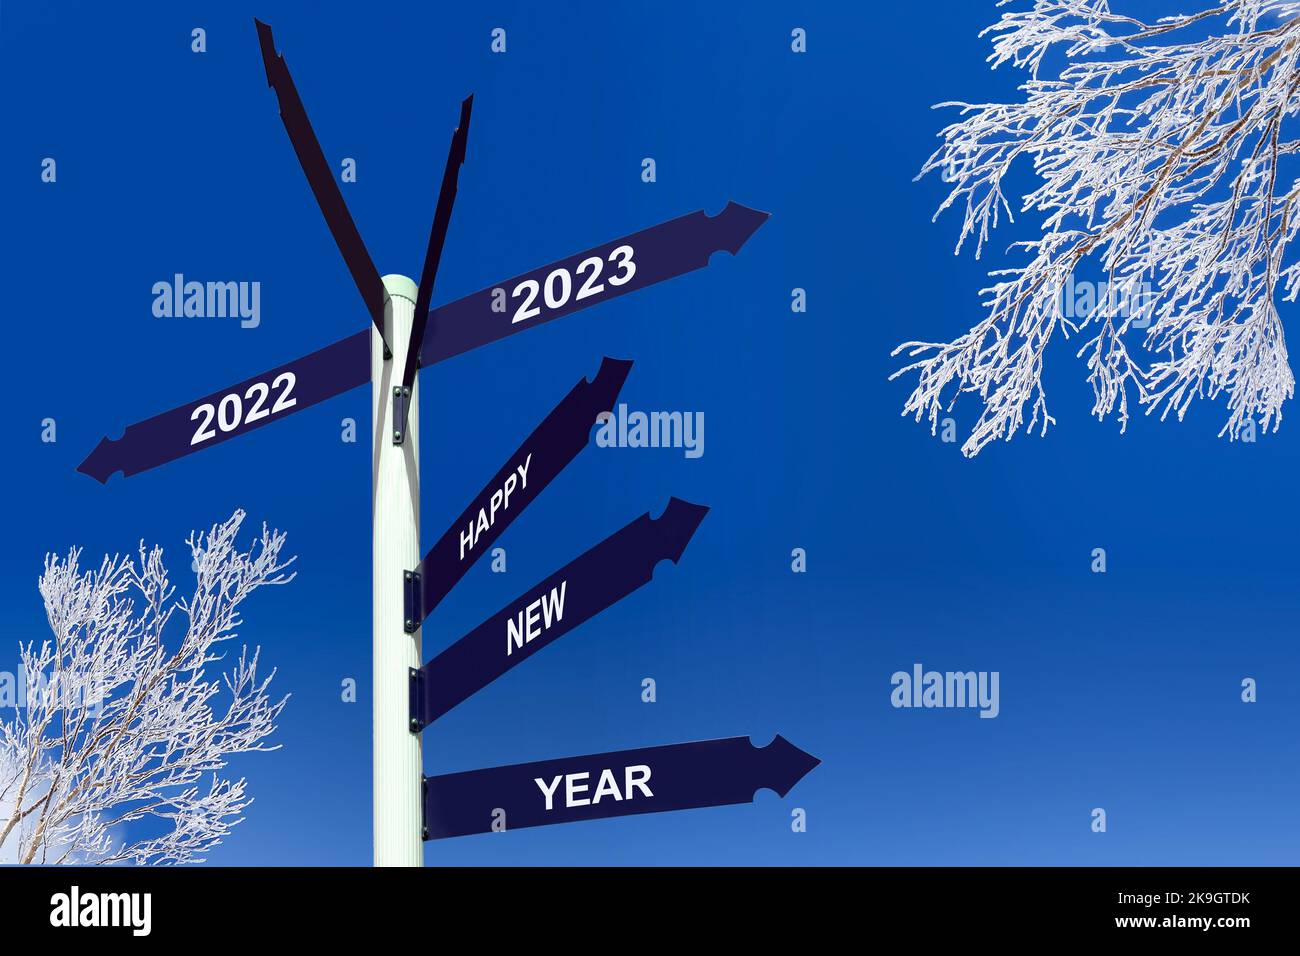 Happy new year 2023 on direction panels, snowy trees, winter greetings Stock Photo